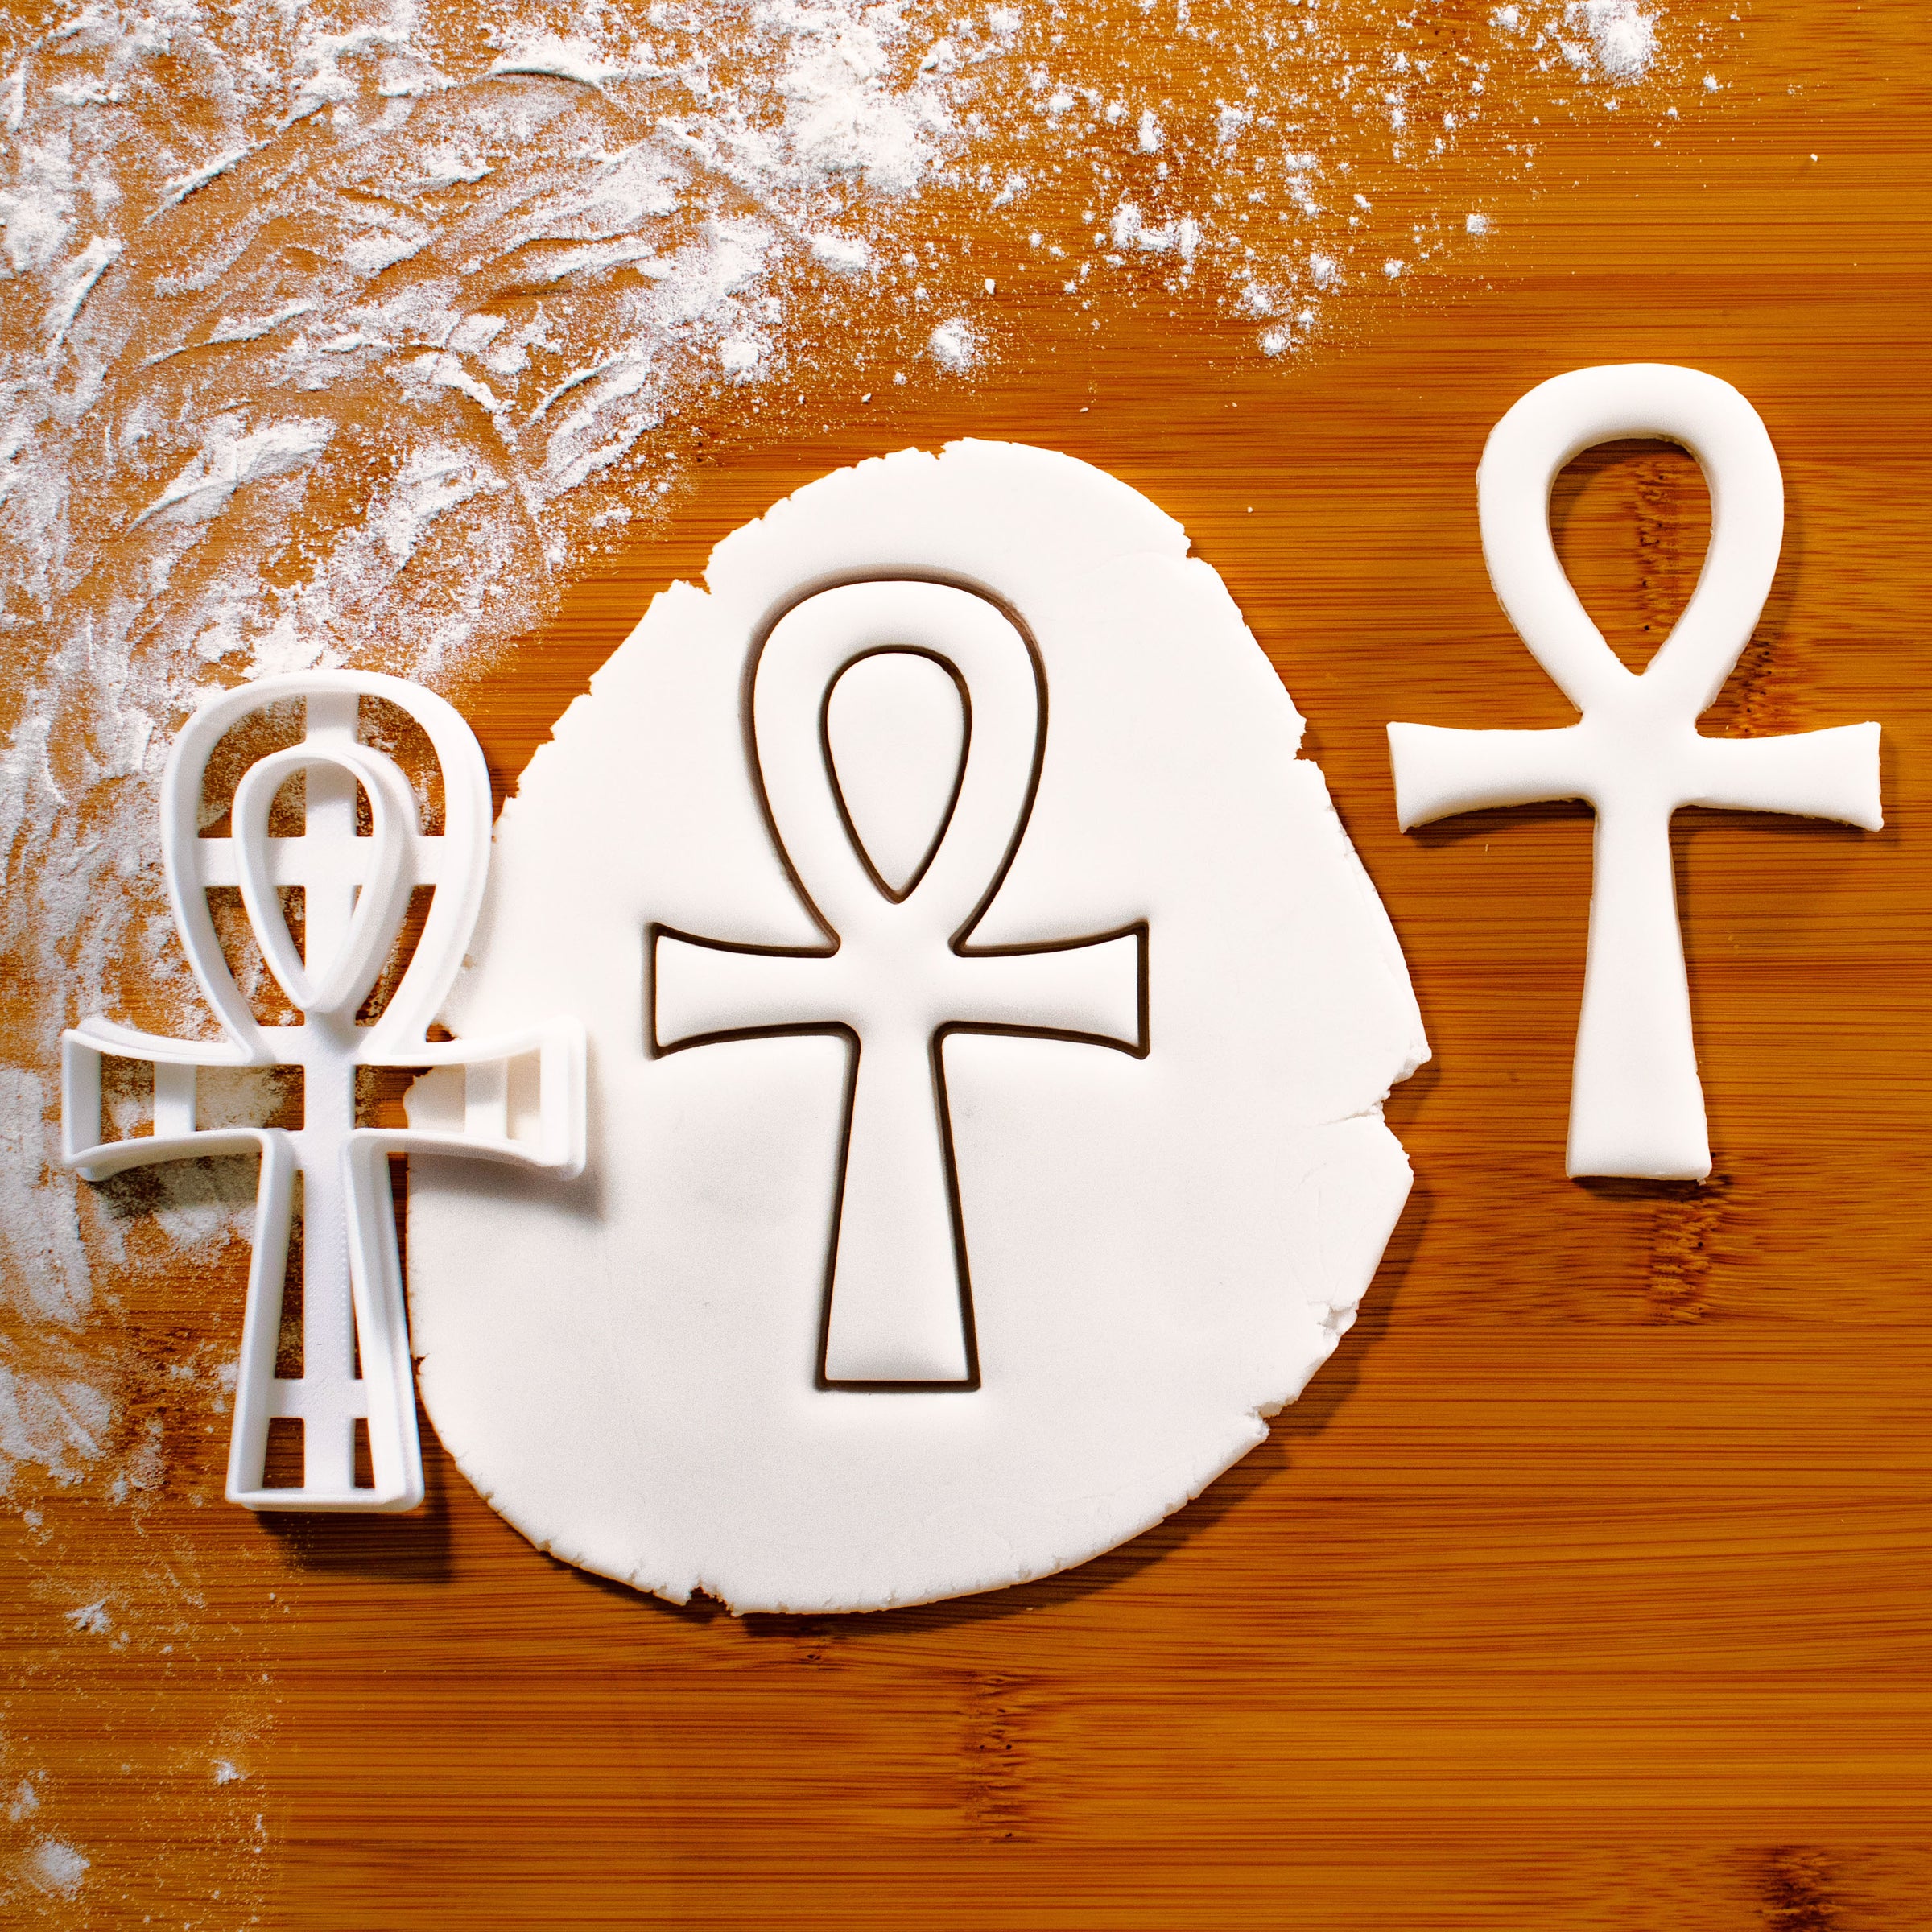 Egyptian Ankh cookie cutter pressed on fondant